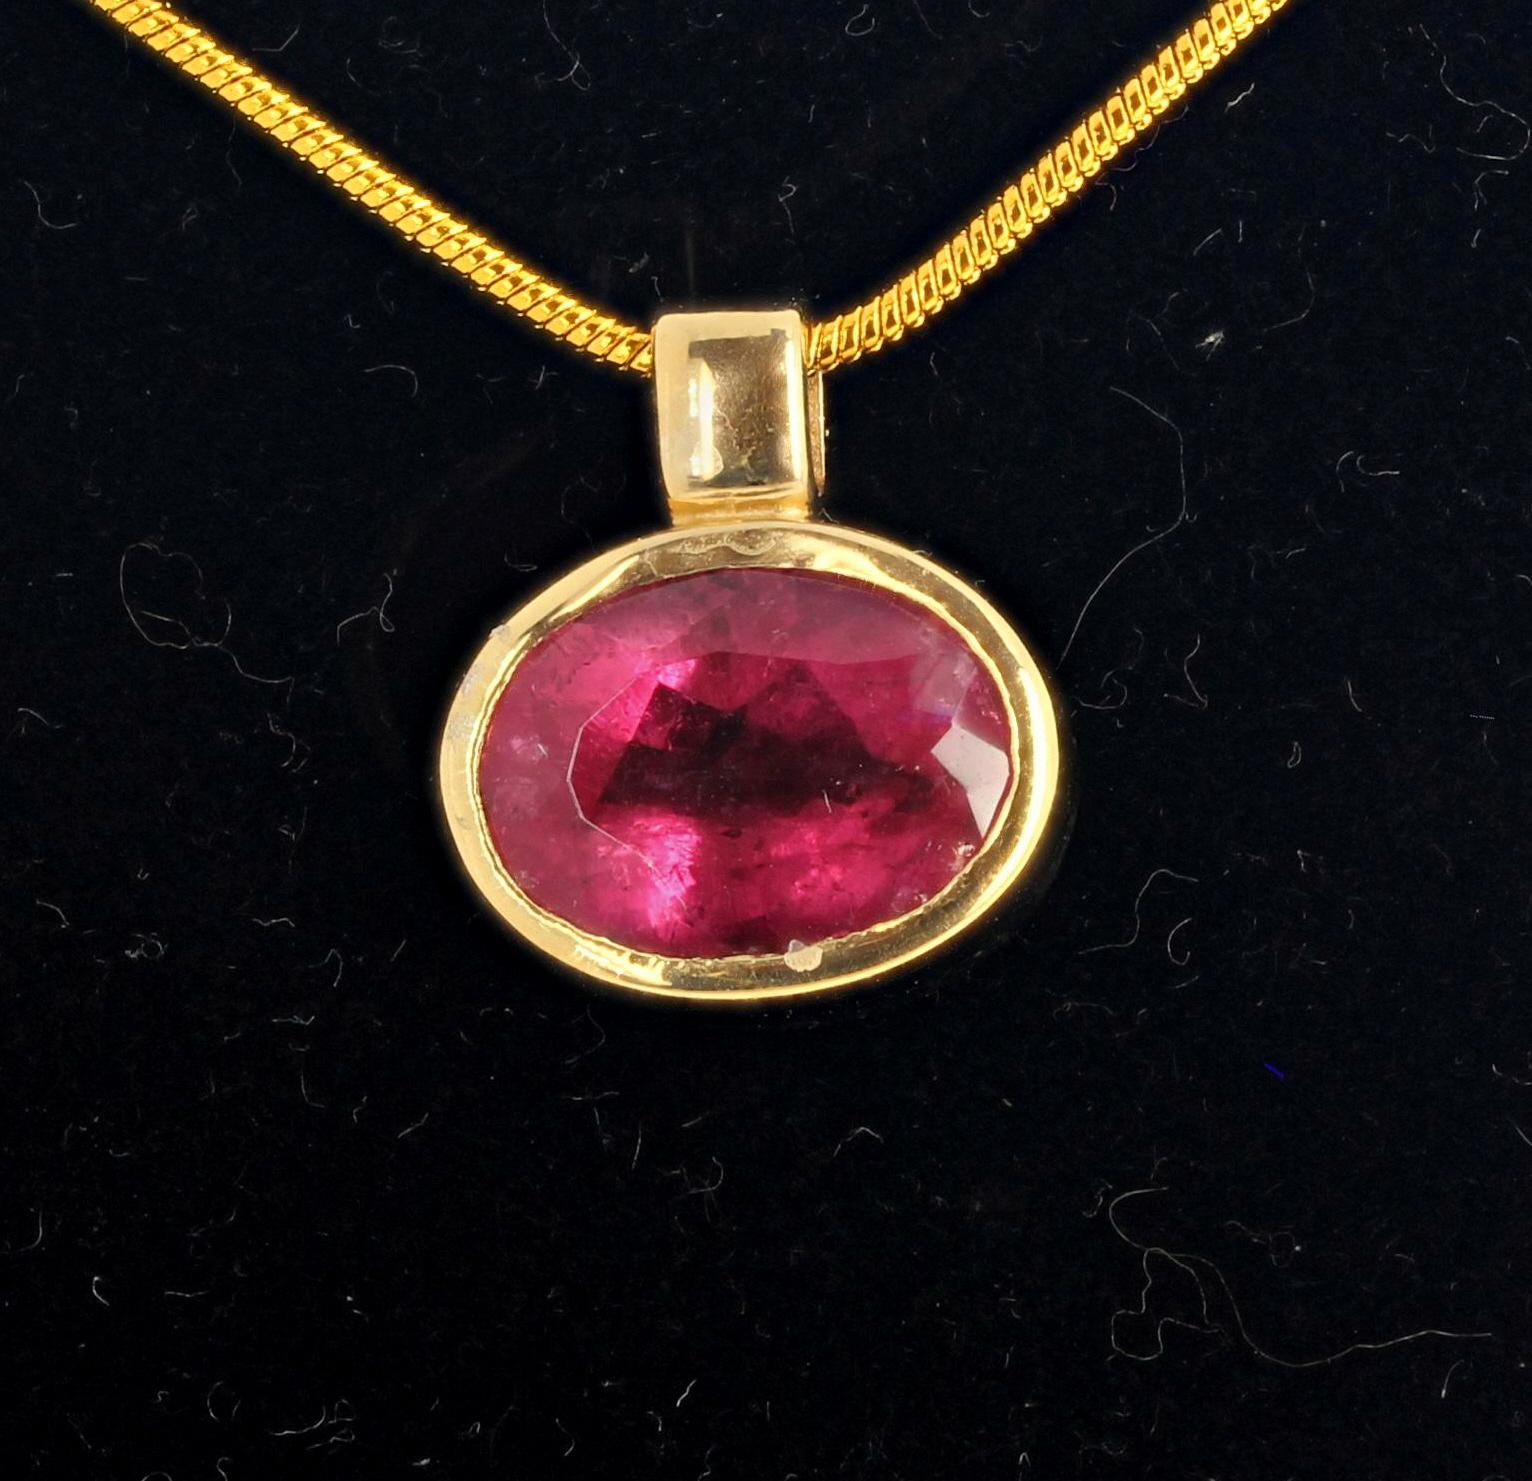 Gemjunky Glowing 5 Carat pinky red natural Rubelite Tourmaline (12 mm x 10 mm) set in this lovely 18Kt yellow gold pendant.  It hangs approximately 15 mm,  Chain not included.  